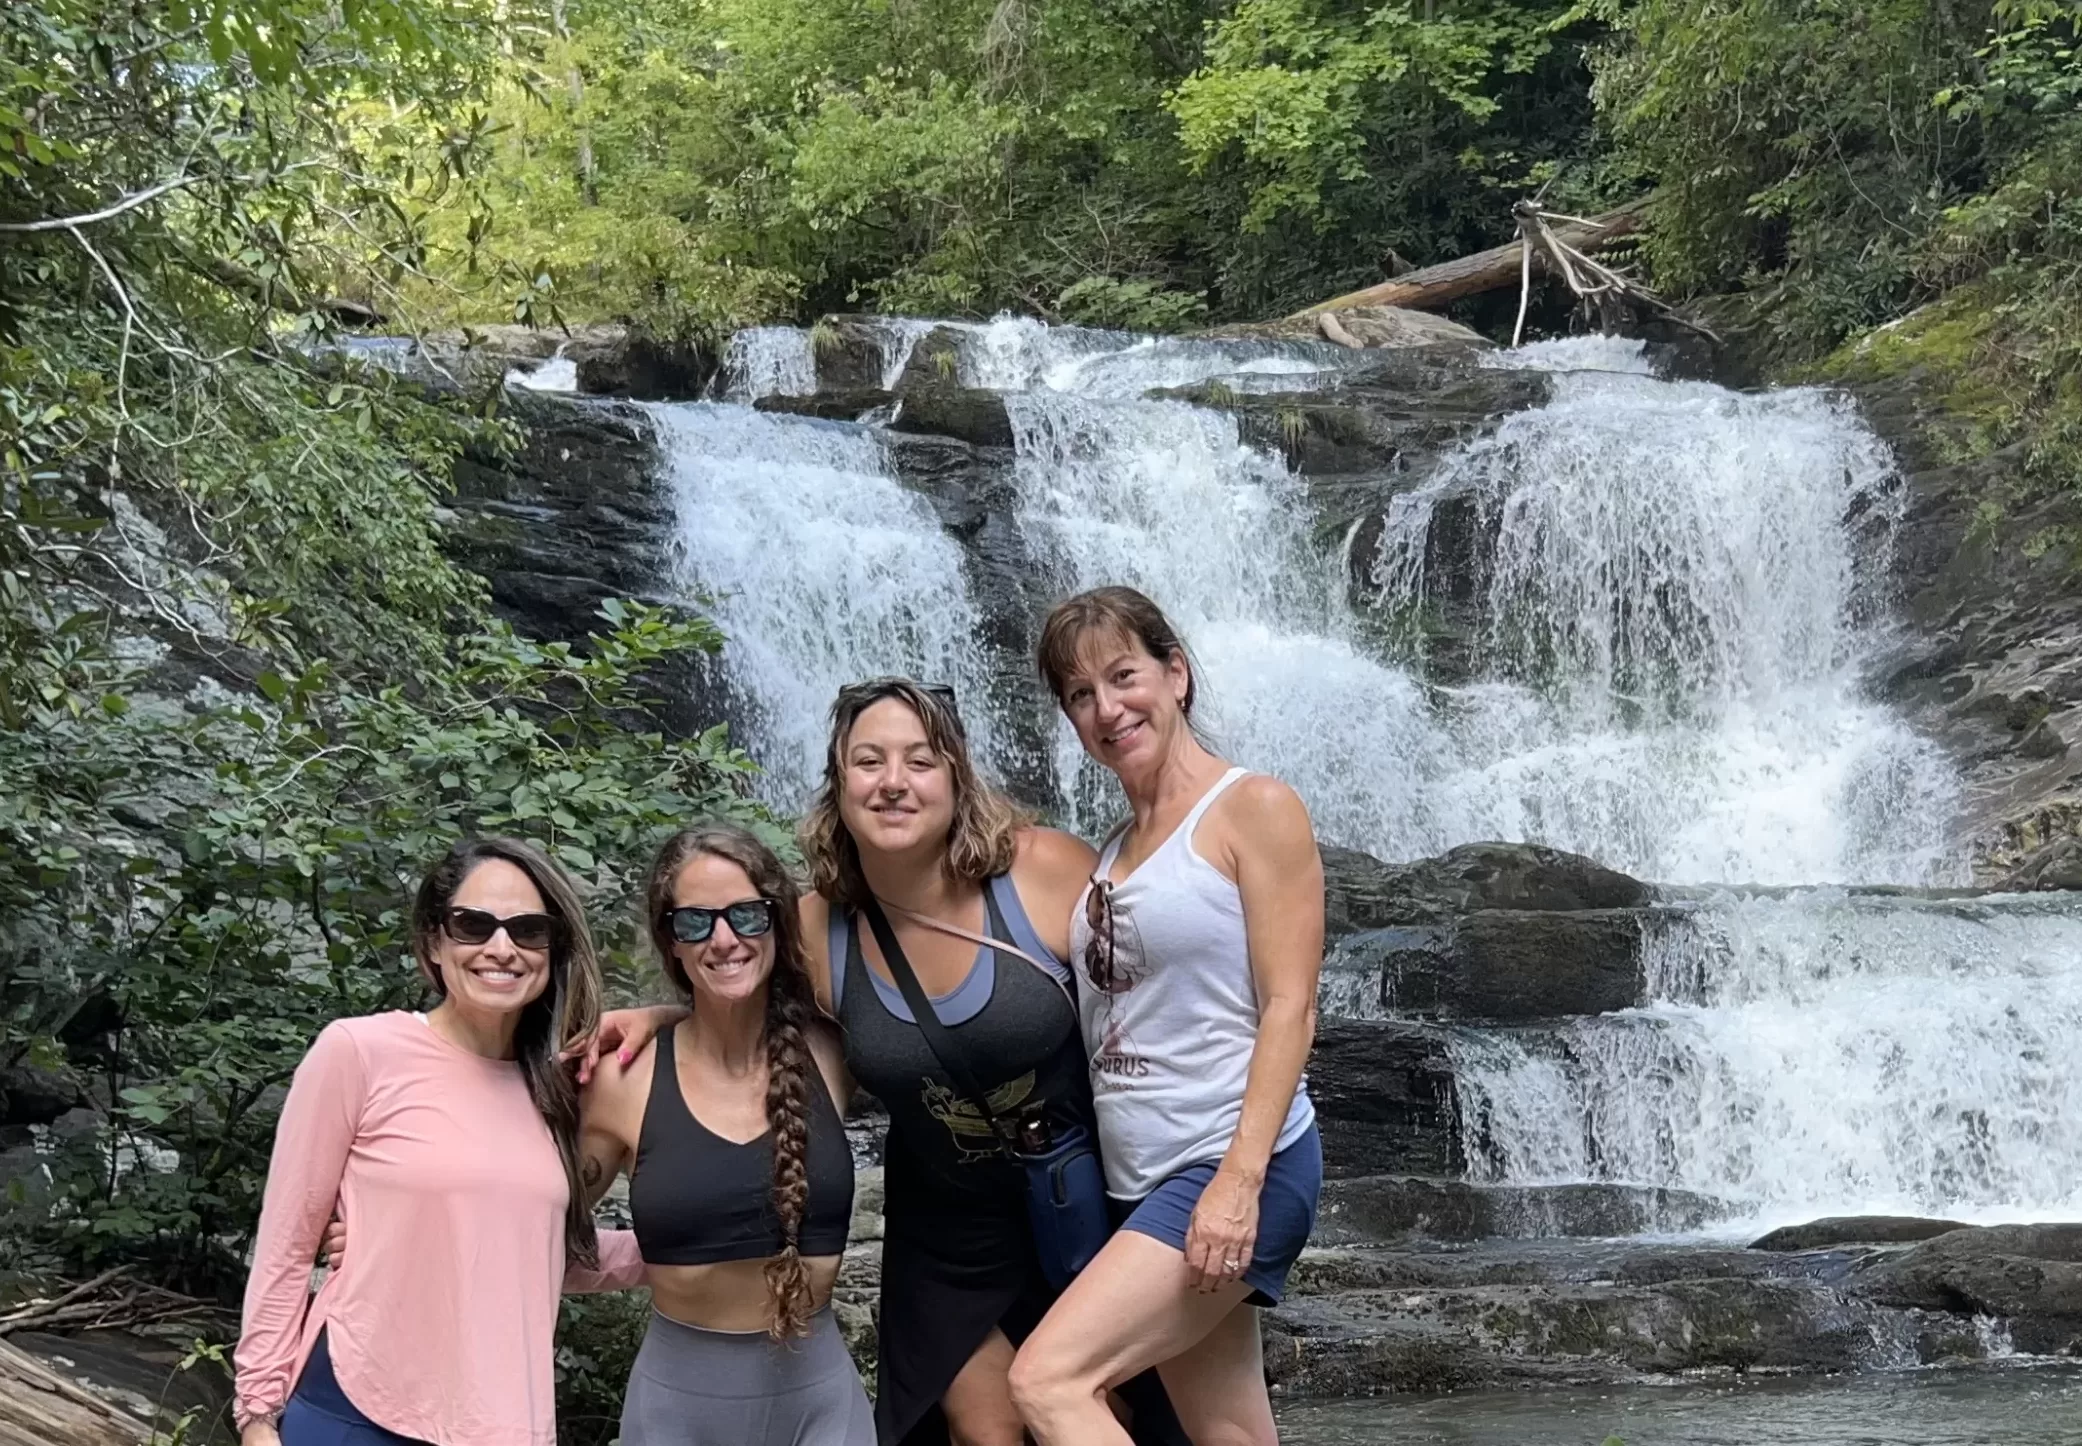 Yoga retreat with Hiking in the Cherokee National Forest for Women